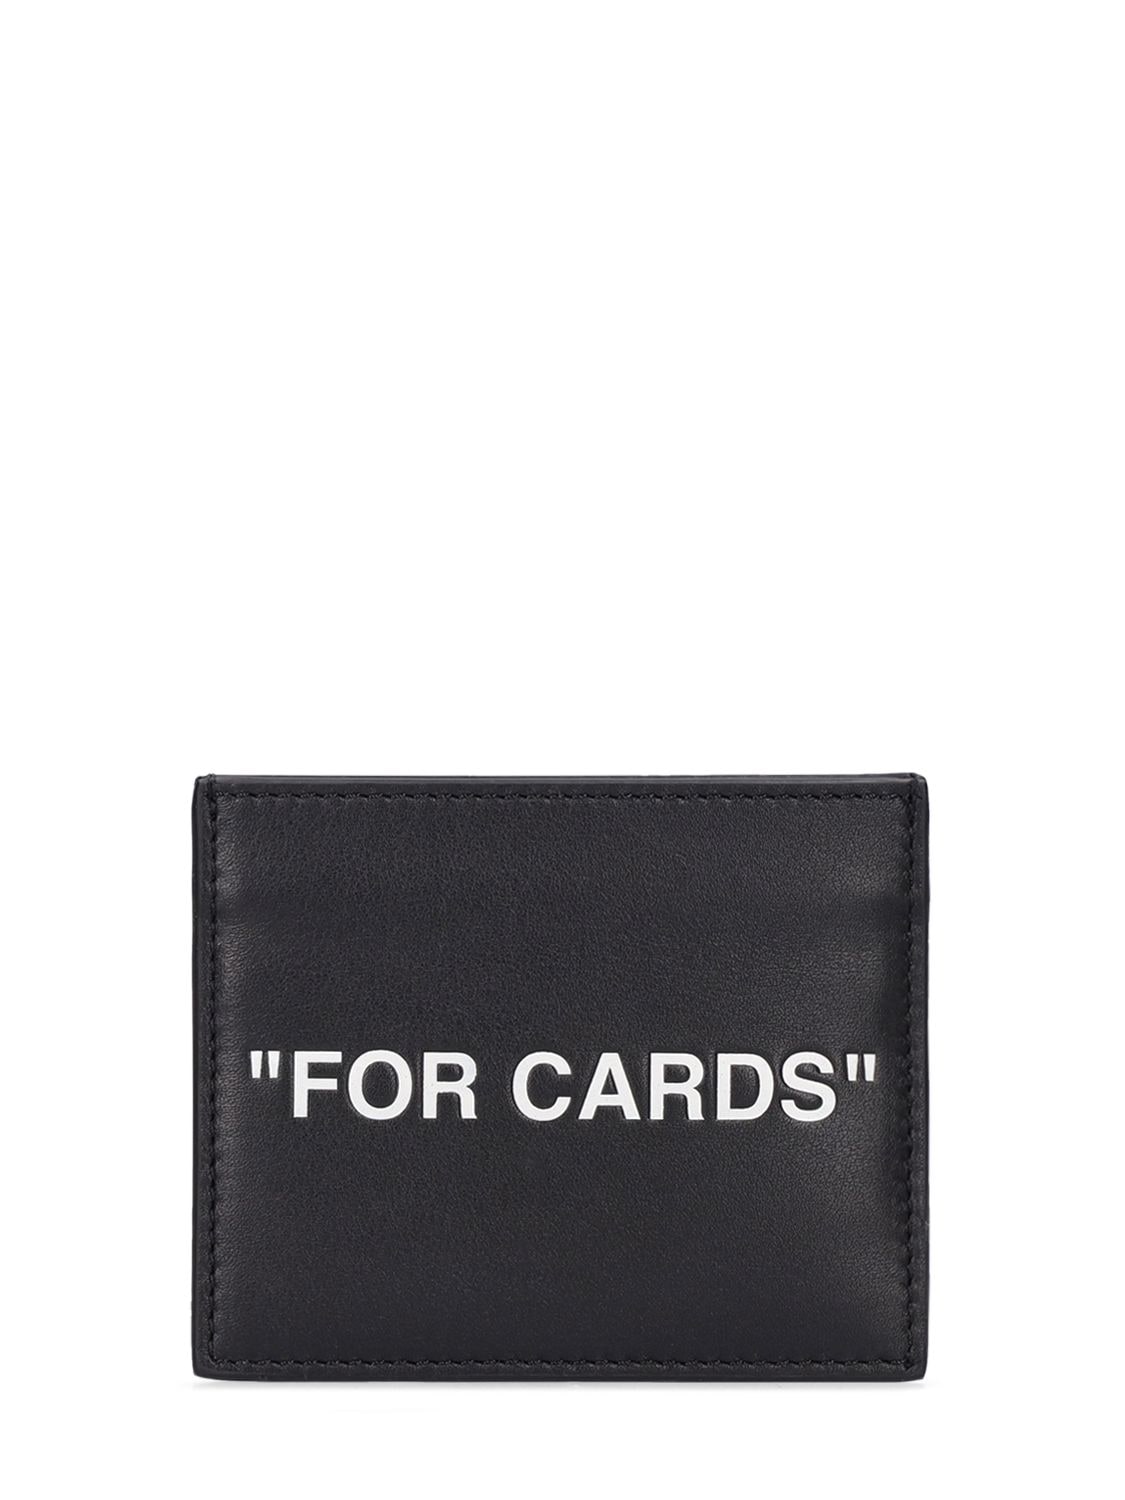 Shop Off-white "for Cards" Leather Card Holder In Black,white